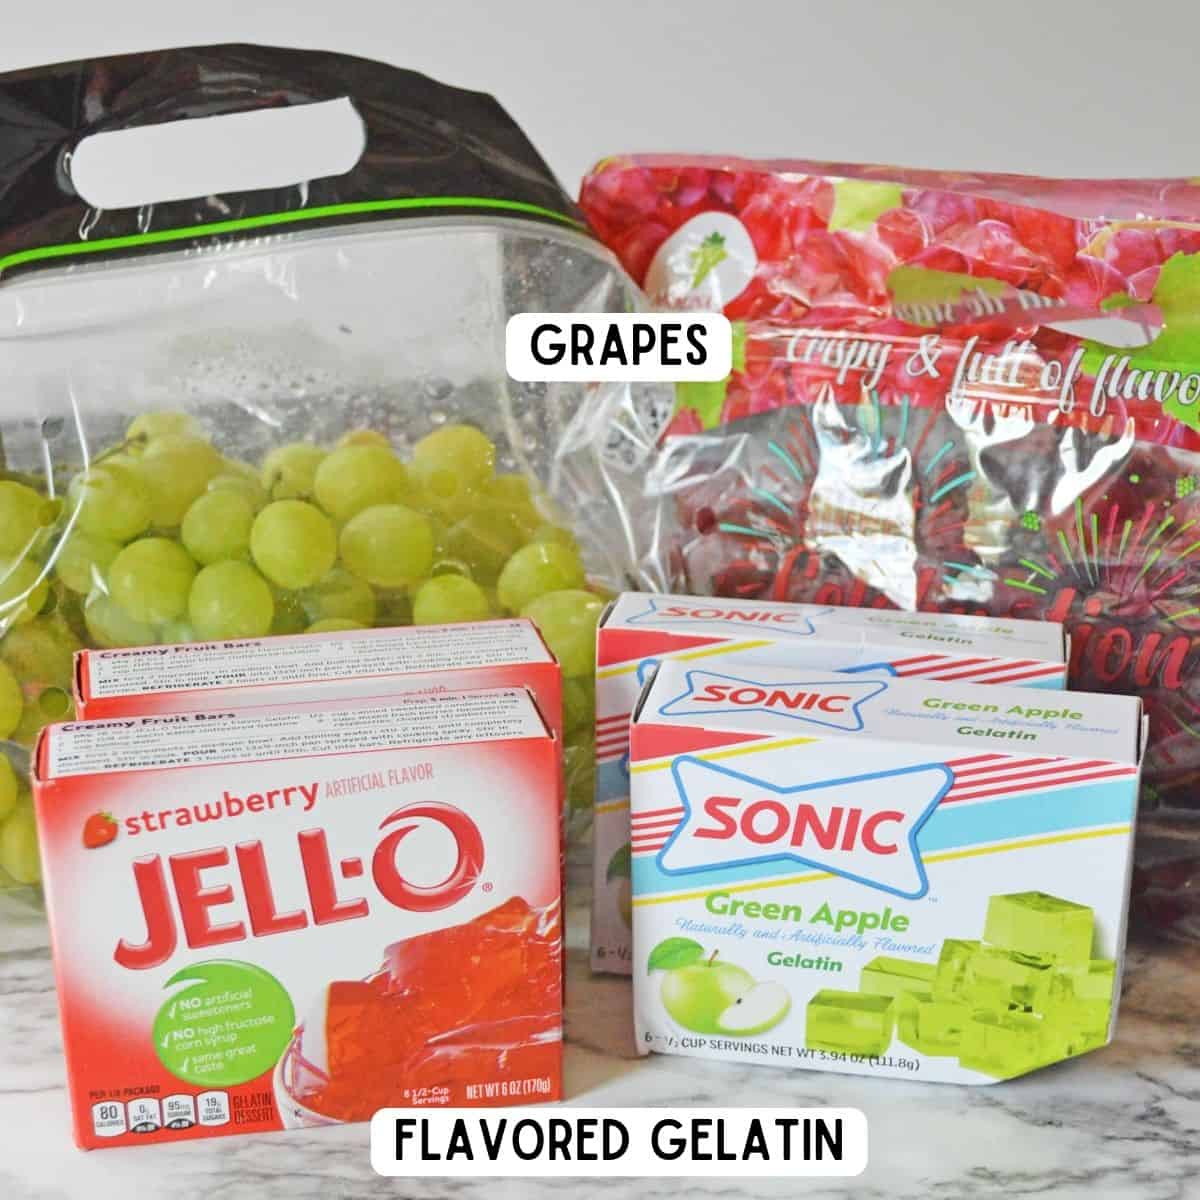 Bag of green grapes, bag of red grapes, strawberry jello mix, and Sonic green apple gelatin.